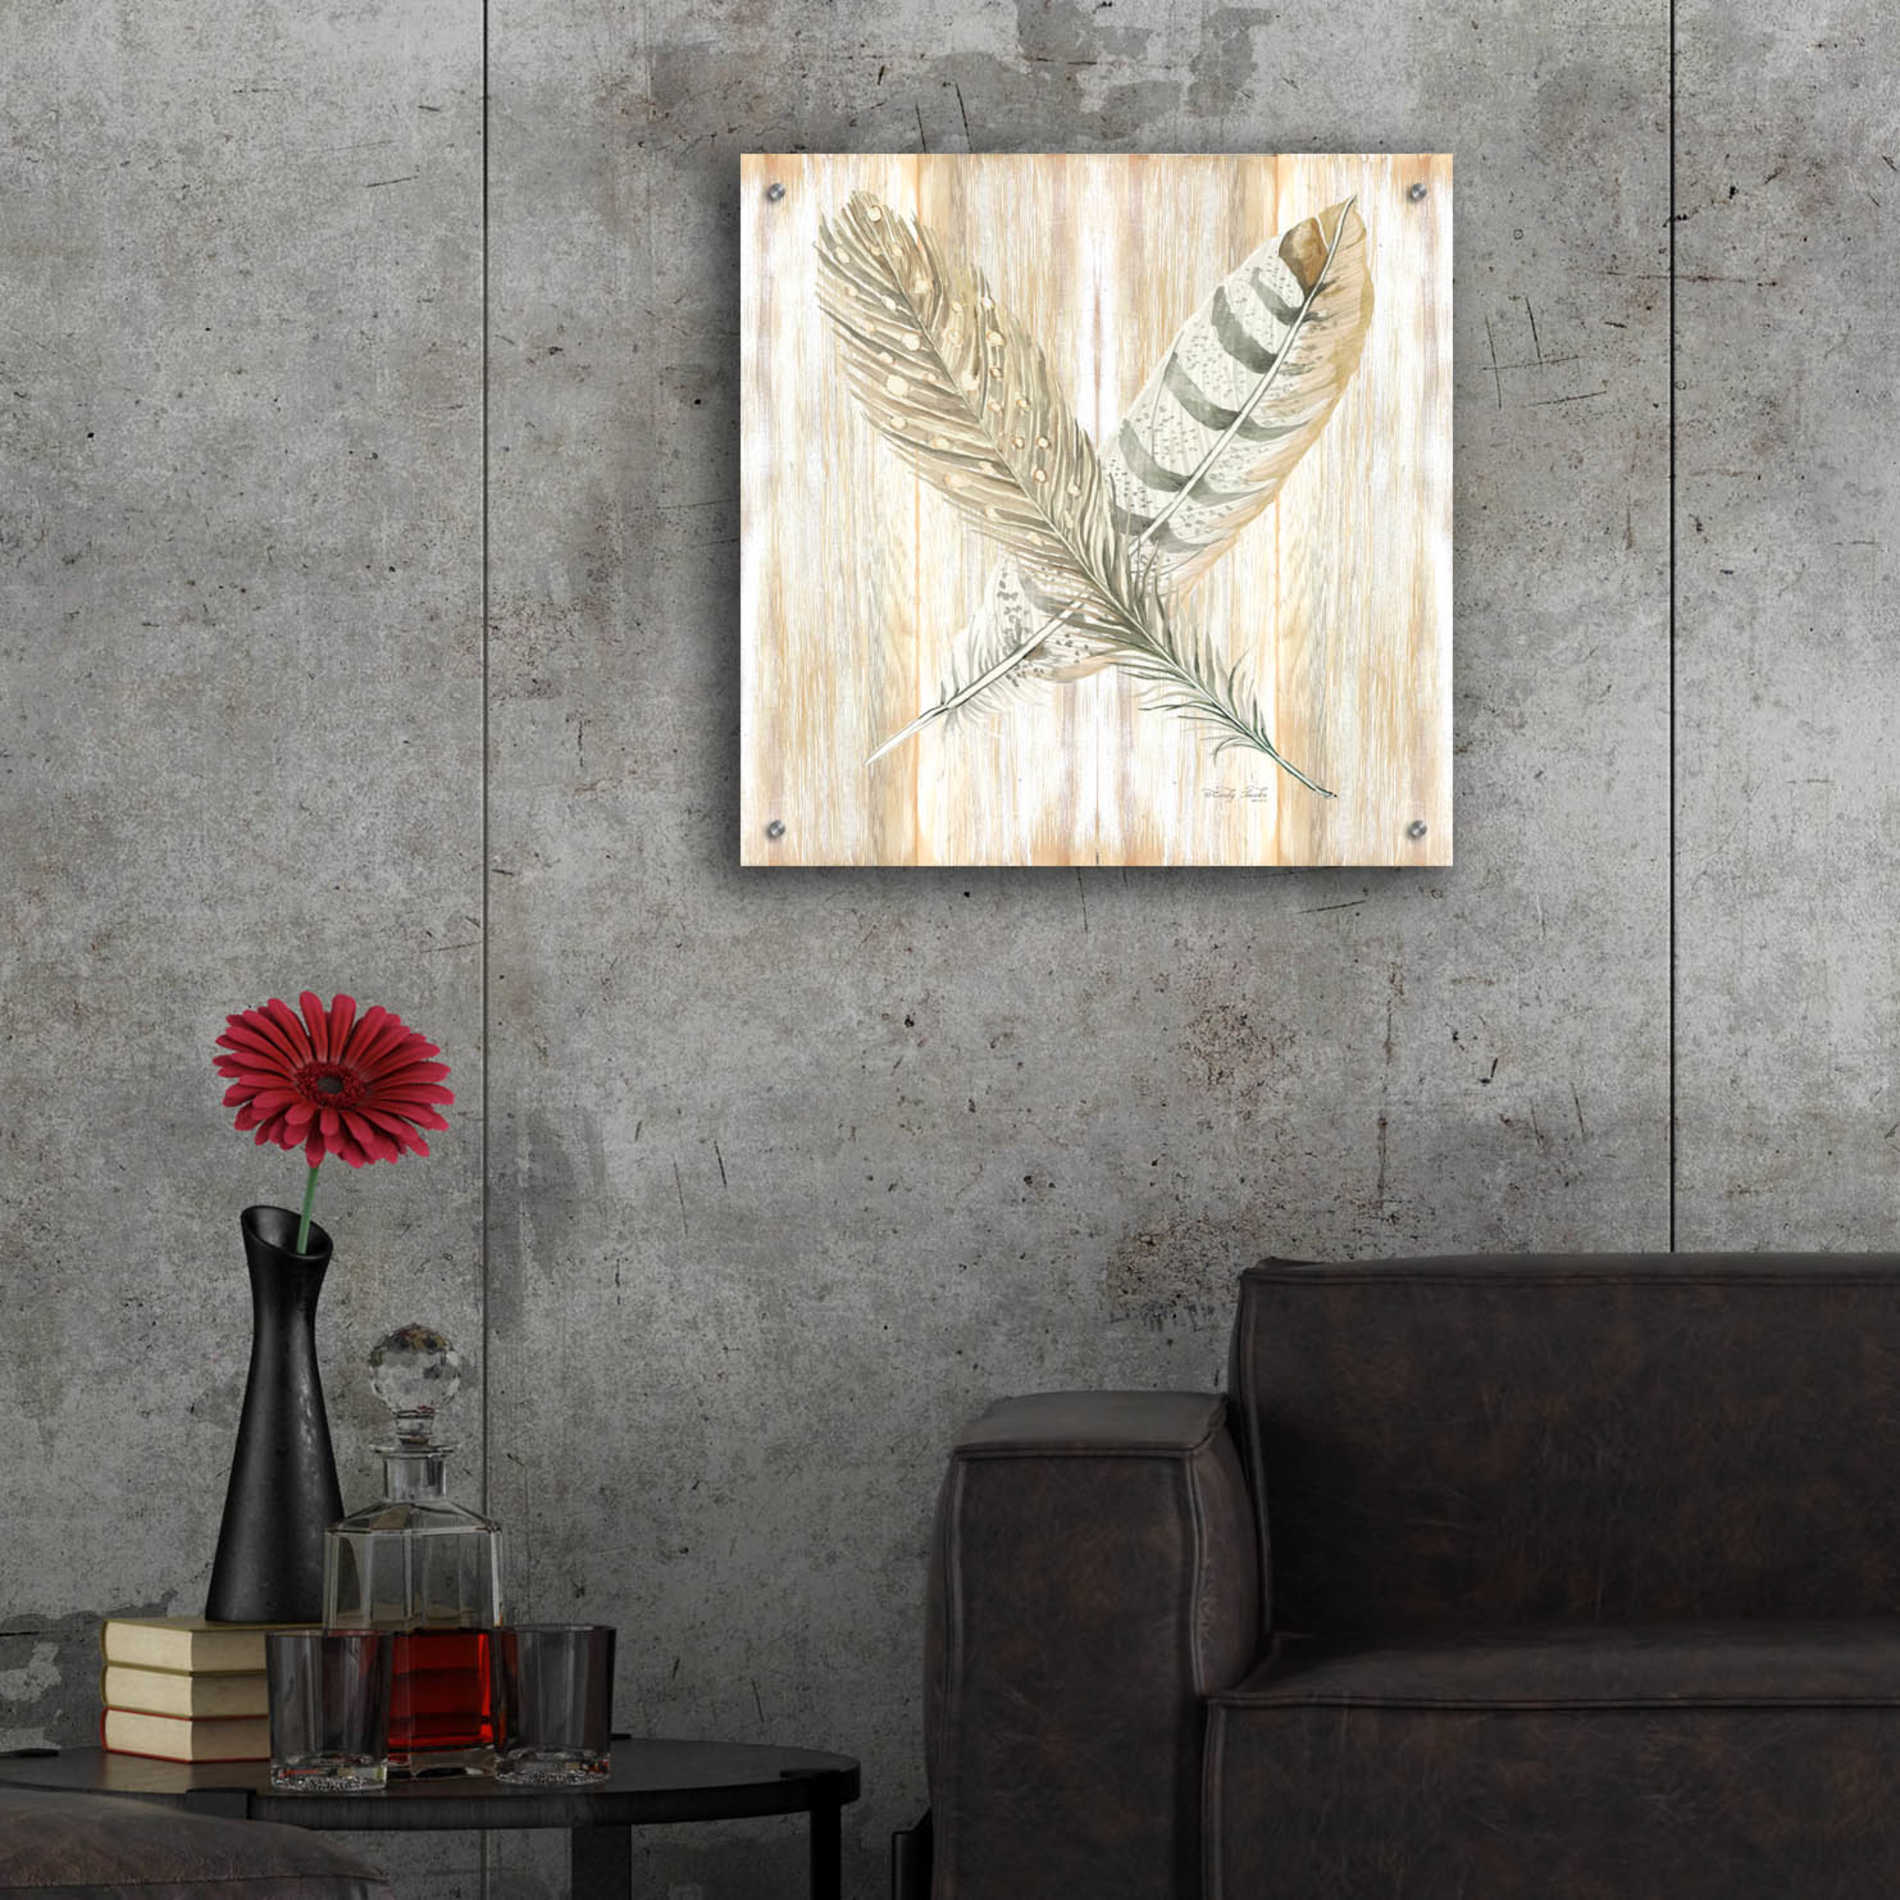 Epic Art 'Feathers Crossed II' by Cindy Jacobs, Acrylic Glass Wall Art,24x24